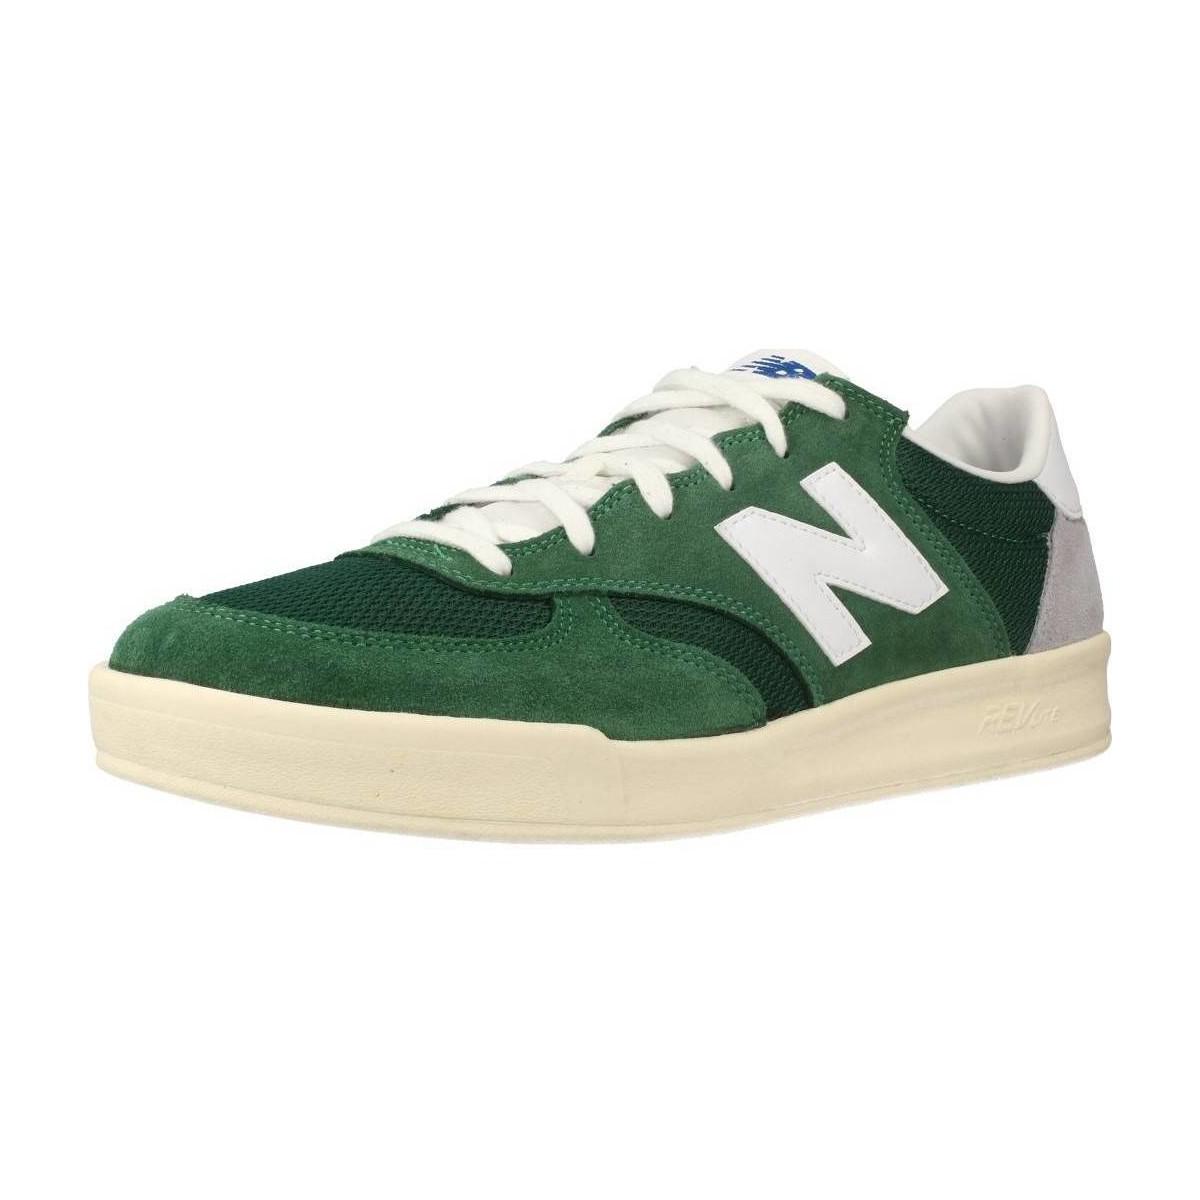 new balance 300 suede green - 52 